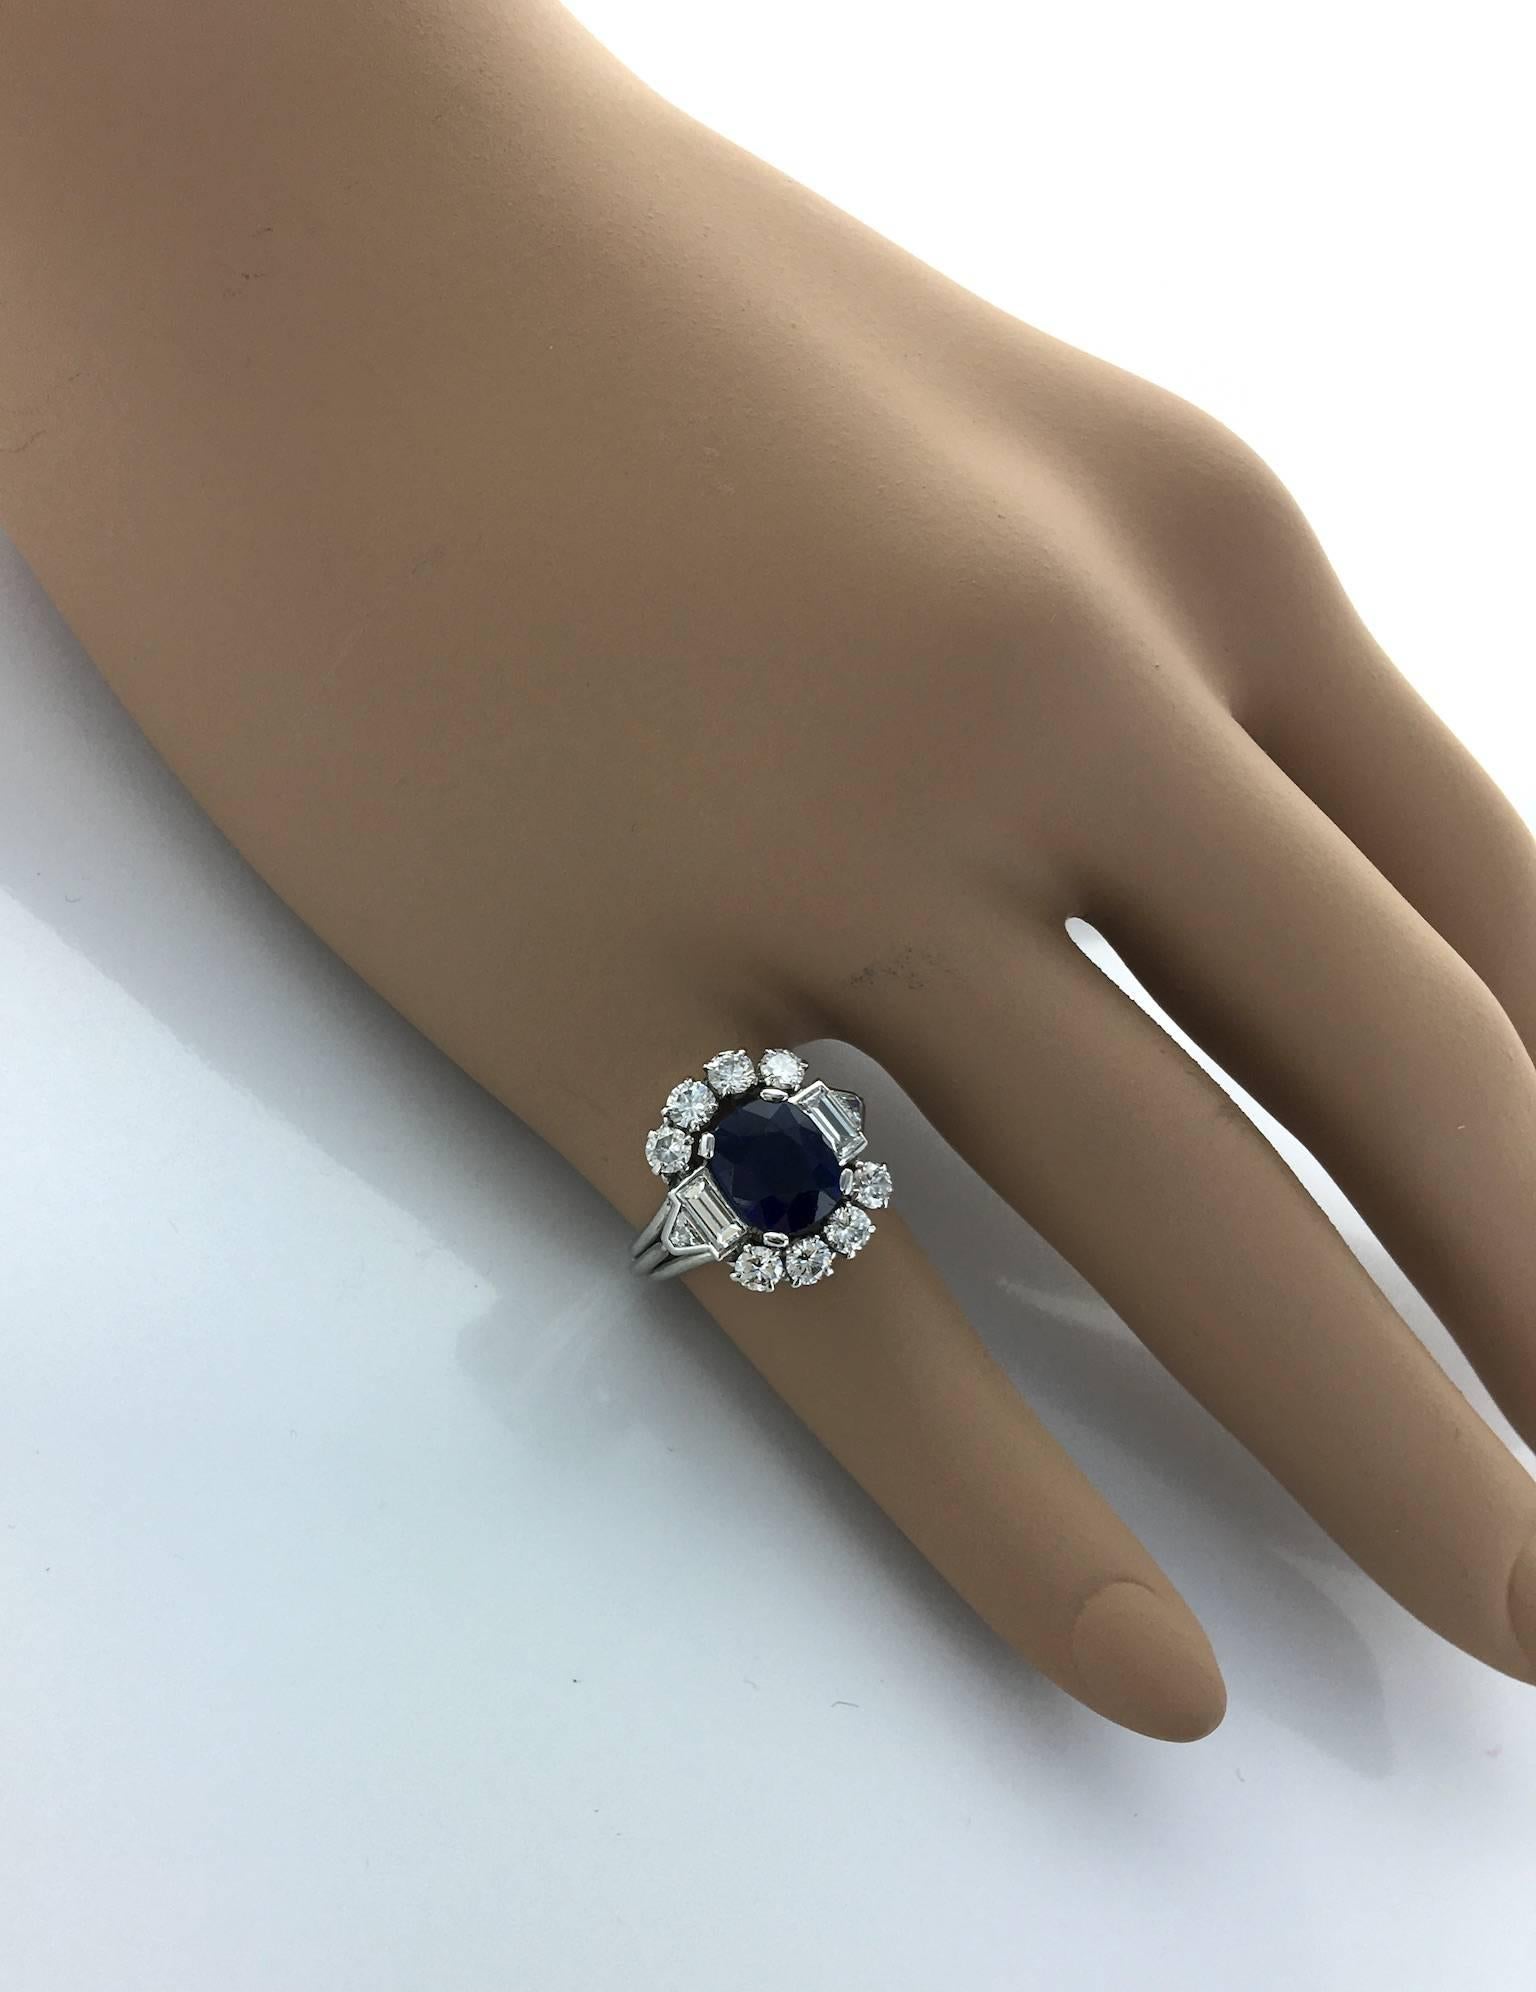 Natural and Non heated Blue Sapphire (2.88 carats) centered on a platinum 850 and diamond elegant ring.
French marks.
Size: Us 5 1/2 (Eu 50.5)

Gubelin Swiss Laboratory Certificate stating the Sapphire is Natural and Non heated.